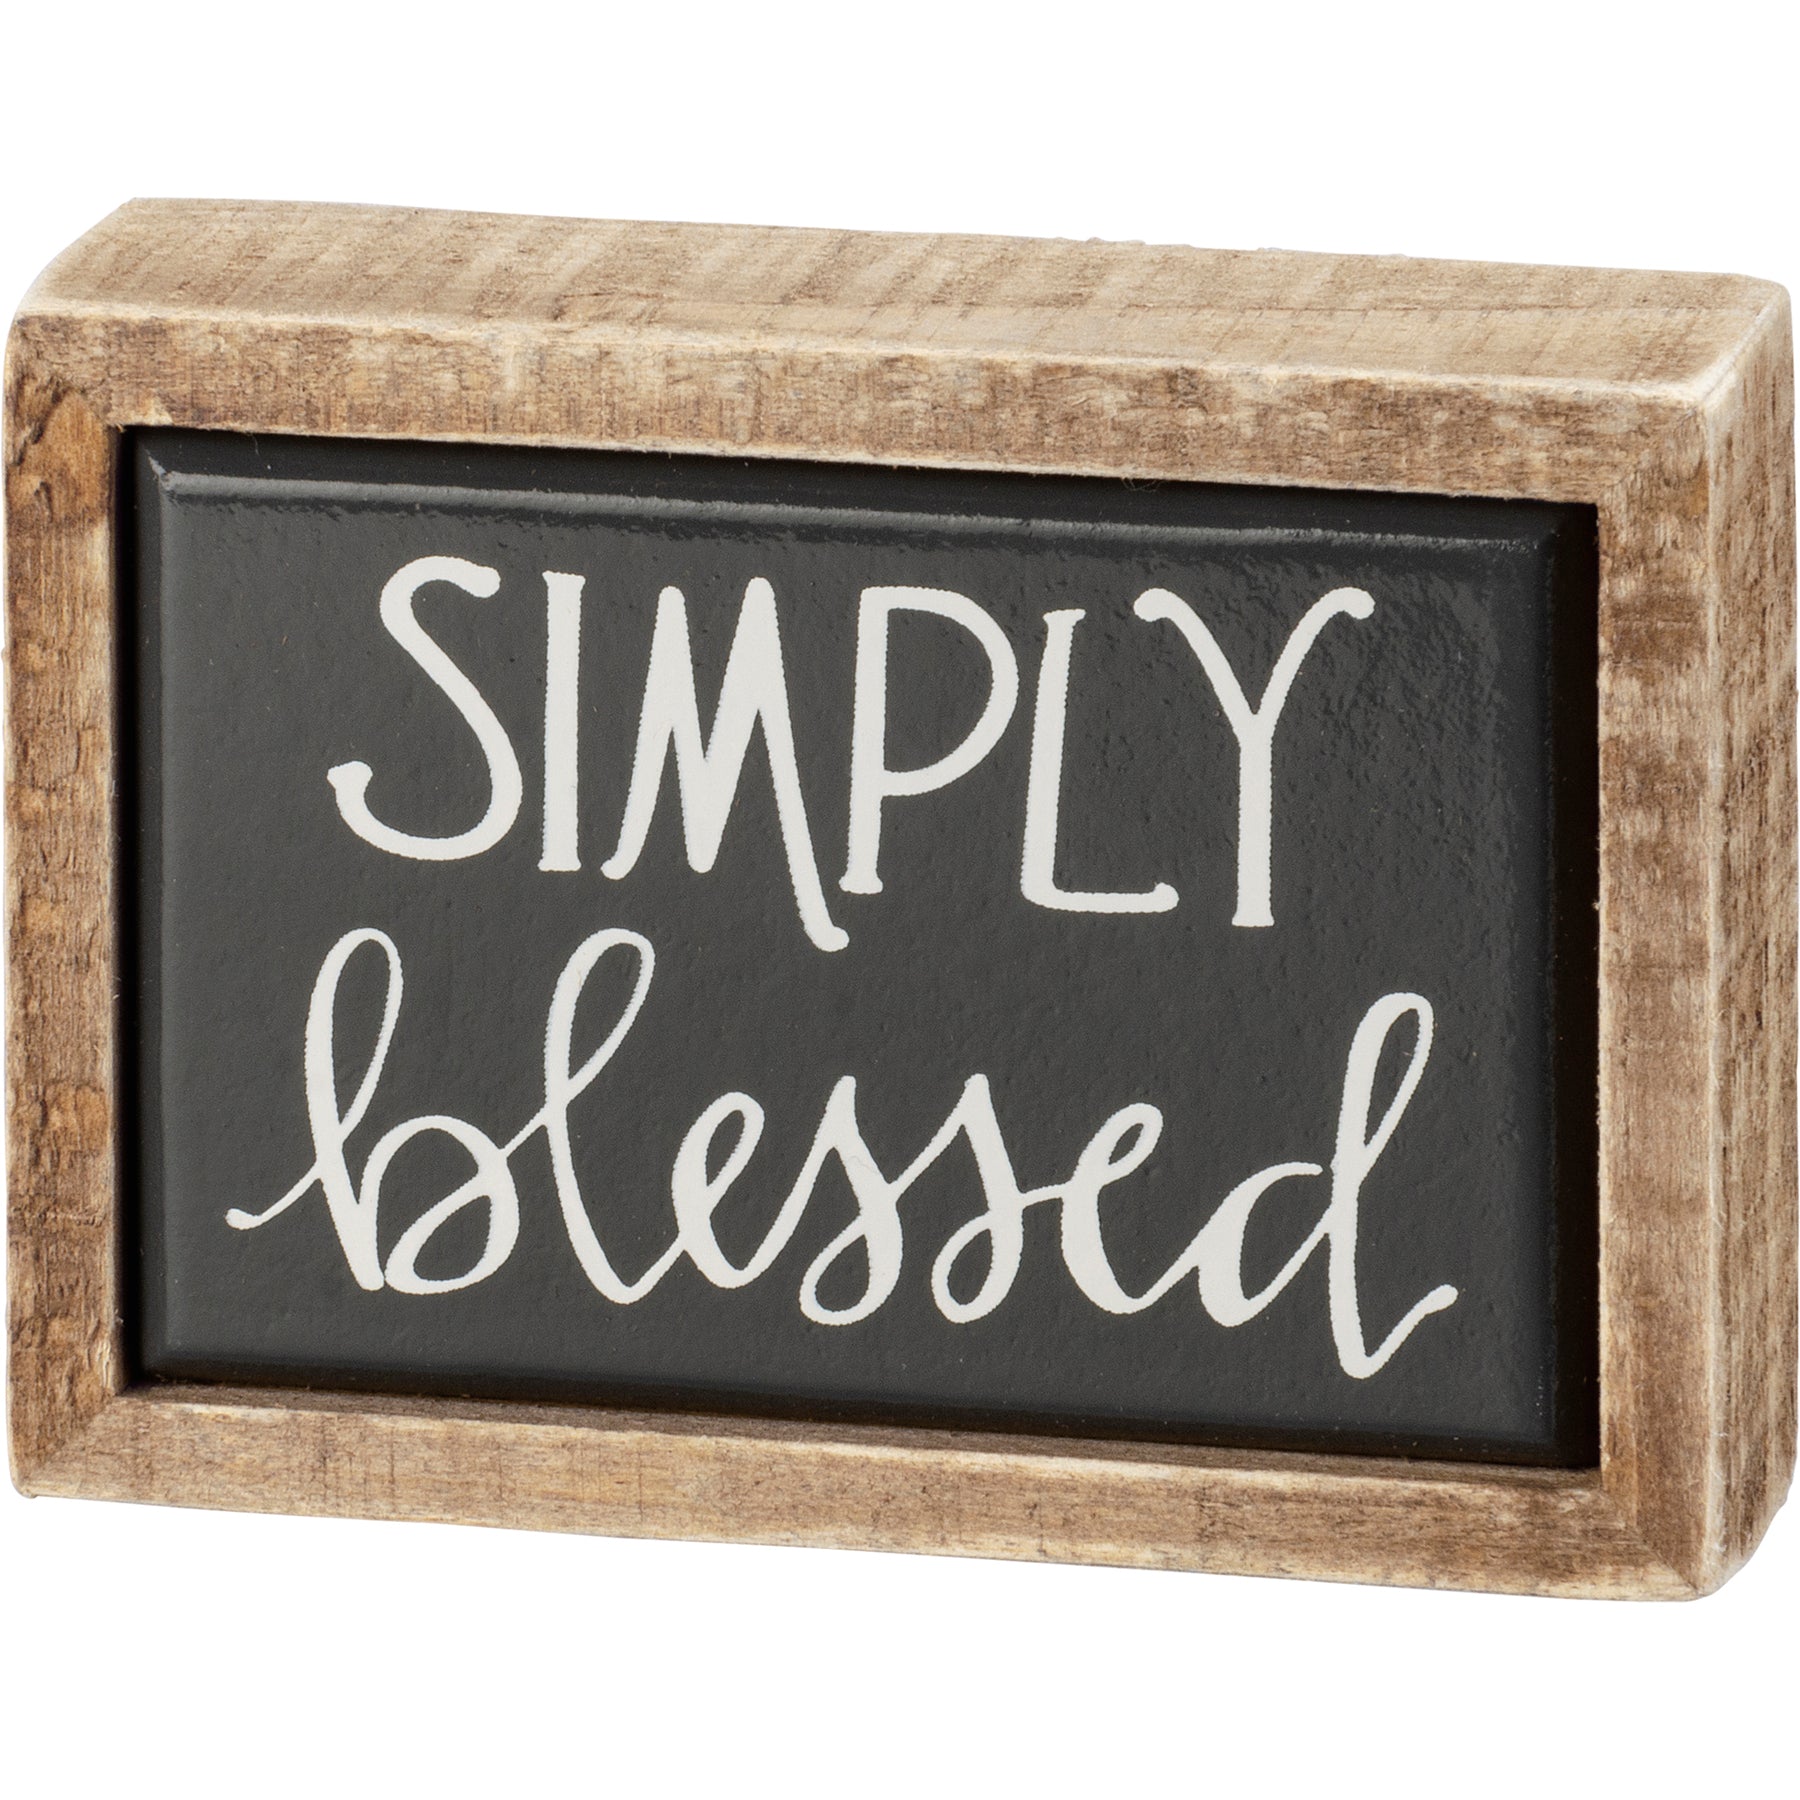 Simply Blessed wooden mini block sign